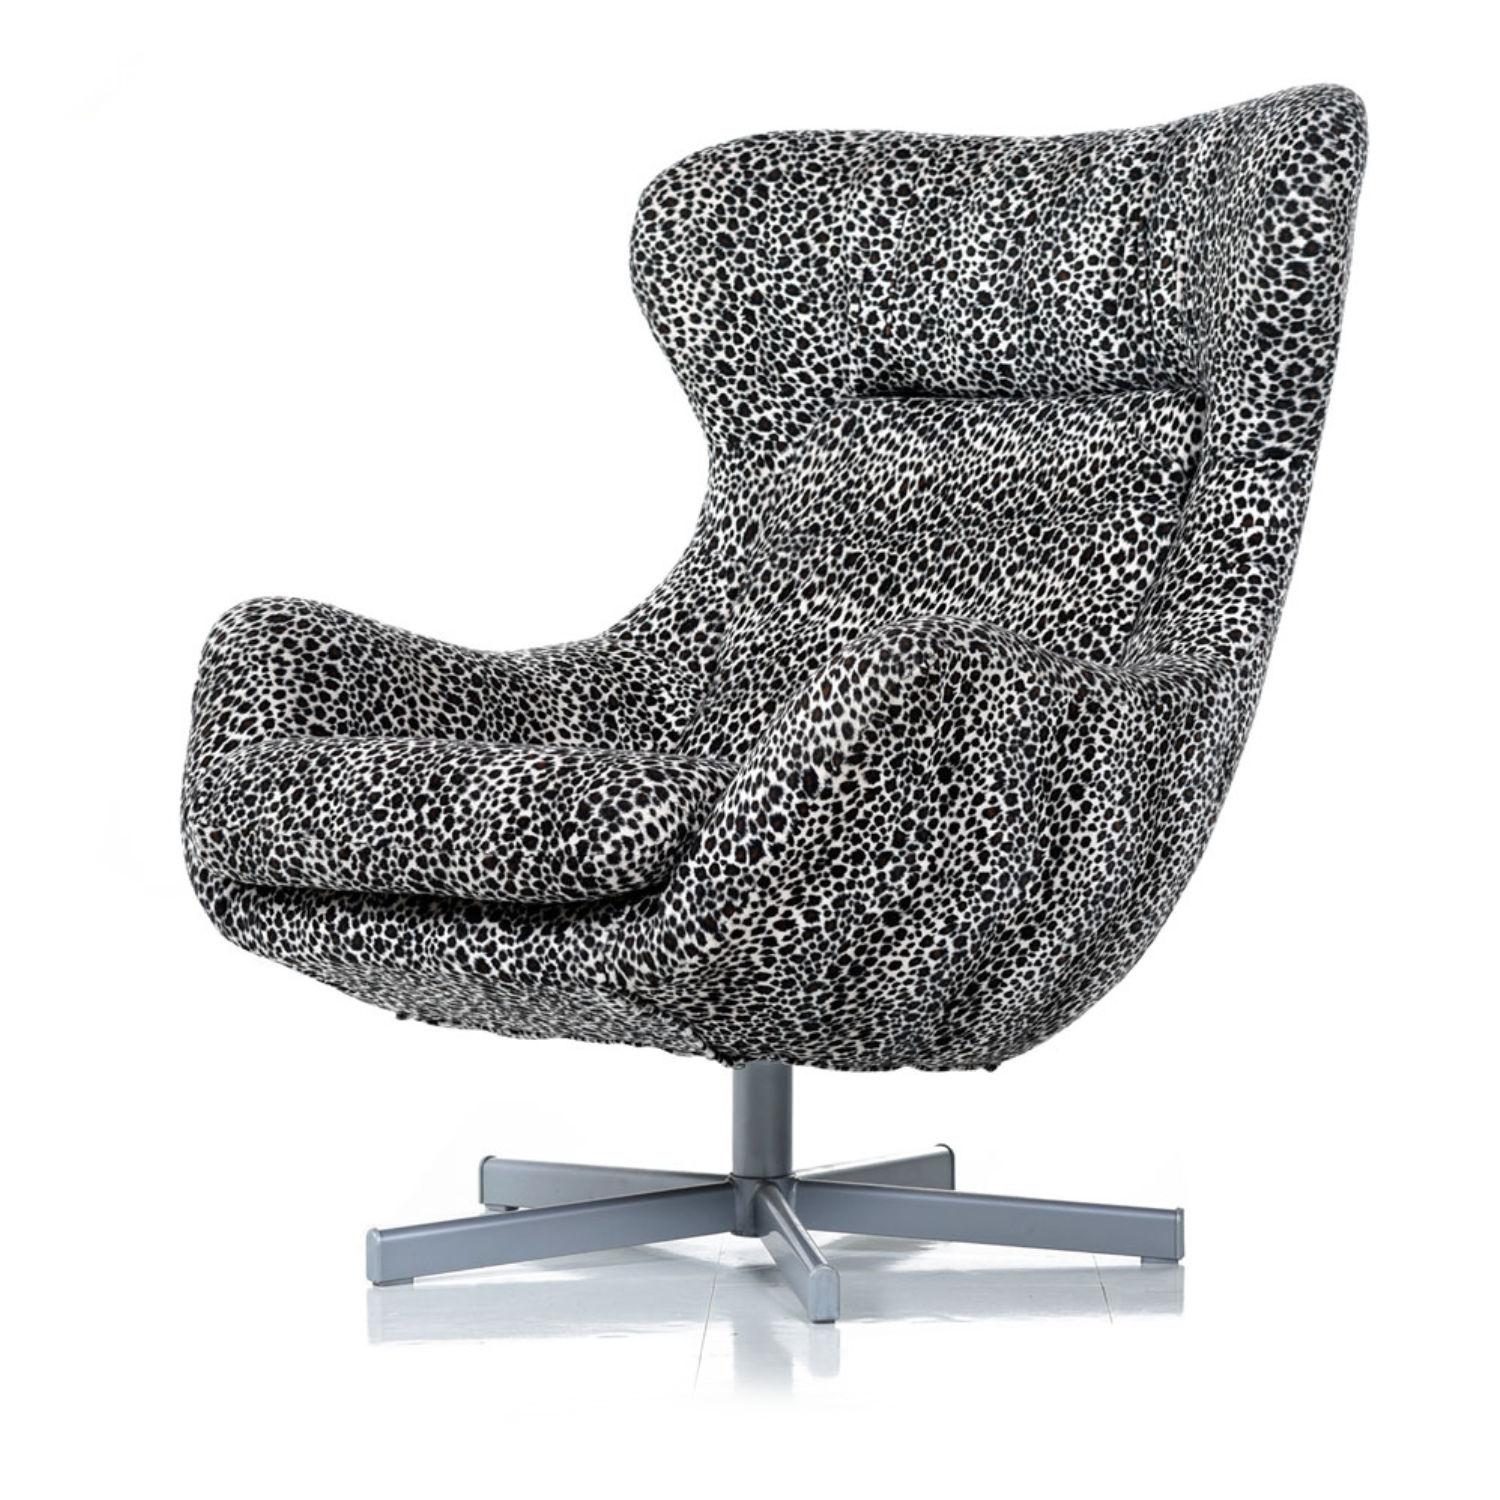 Mid-Century Modern Pair of Vintage Fuzzy Leopard Arne Jacobsen Egg Chair Style Swivel Chairs For Sale